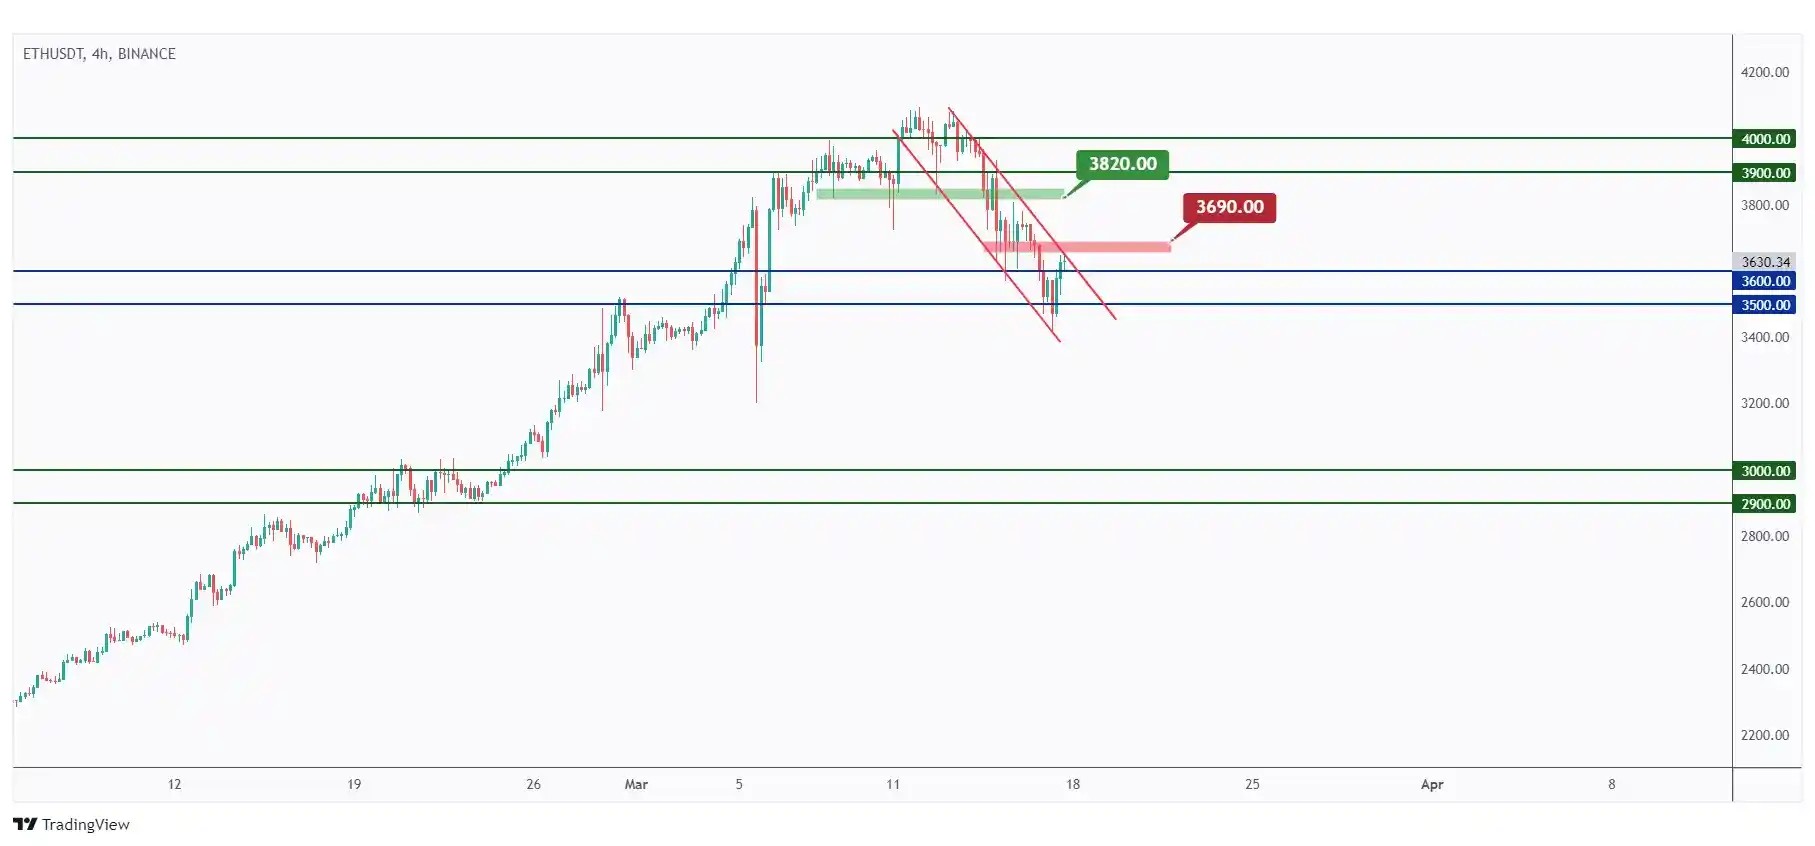 ETH 4h chart showing the last major high at $3690 that we need a break above for the bulls to take over.